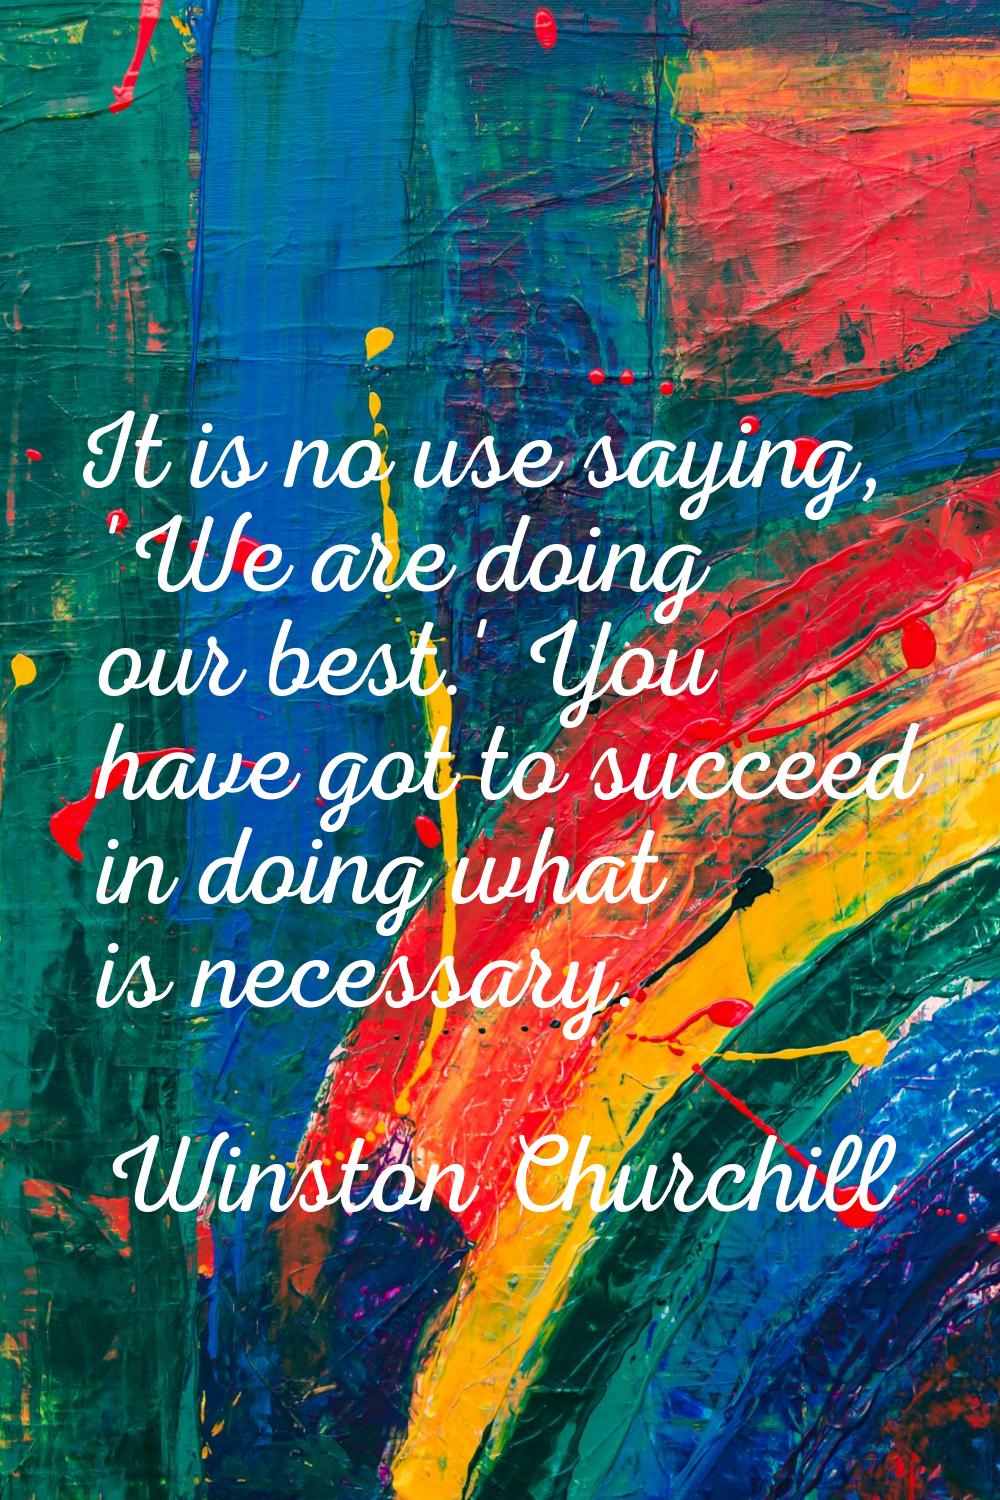 It is no use saying, 'We are doing our best.' You have got to succeed in doing what is necessary.